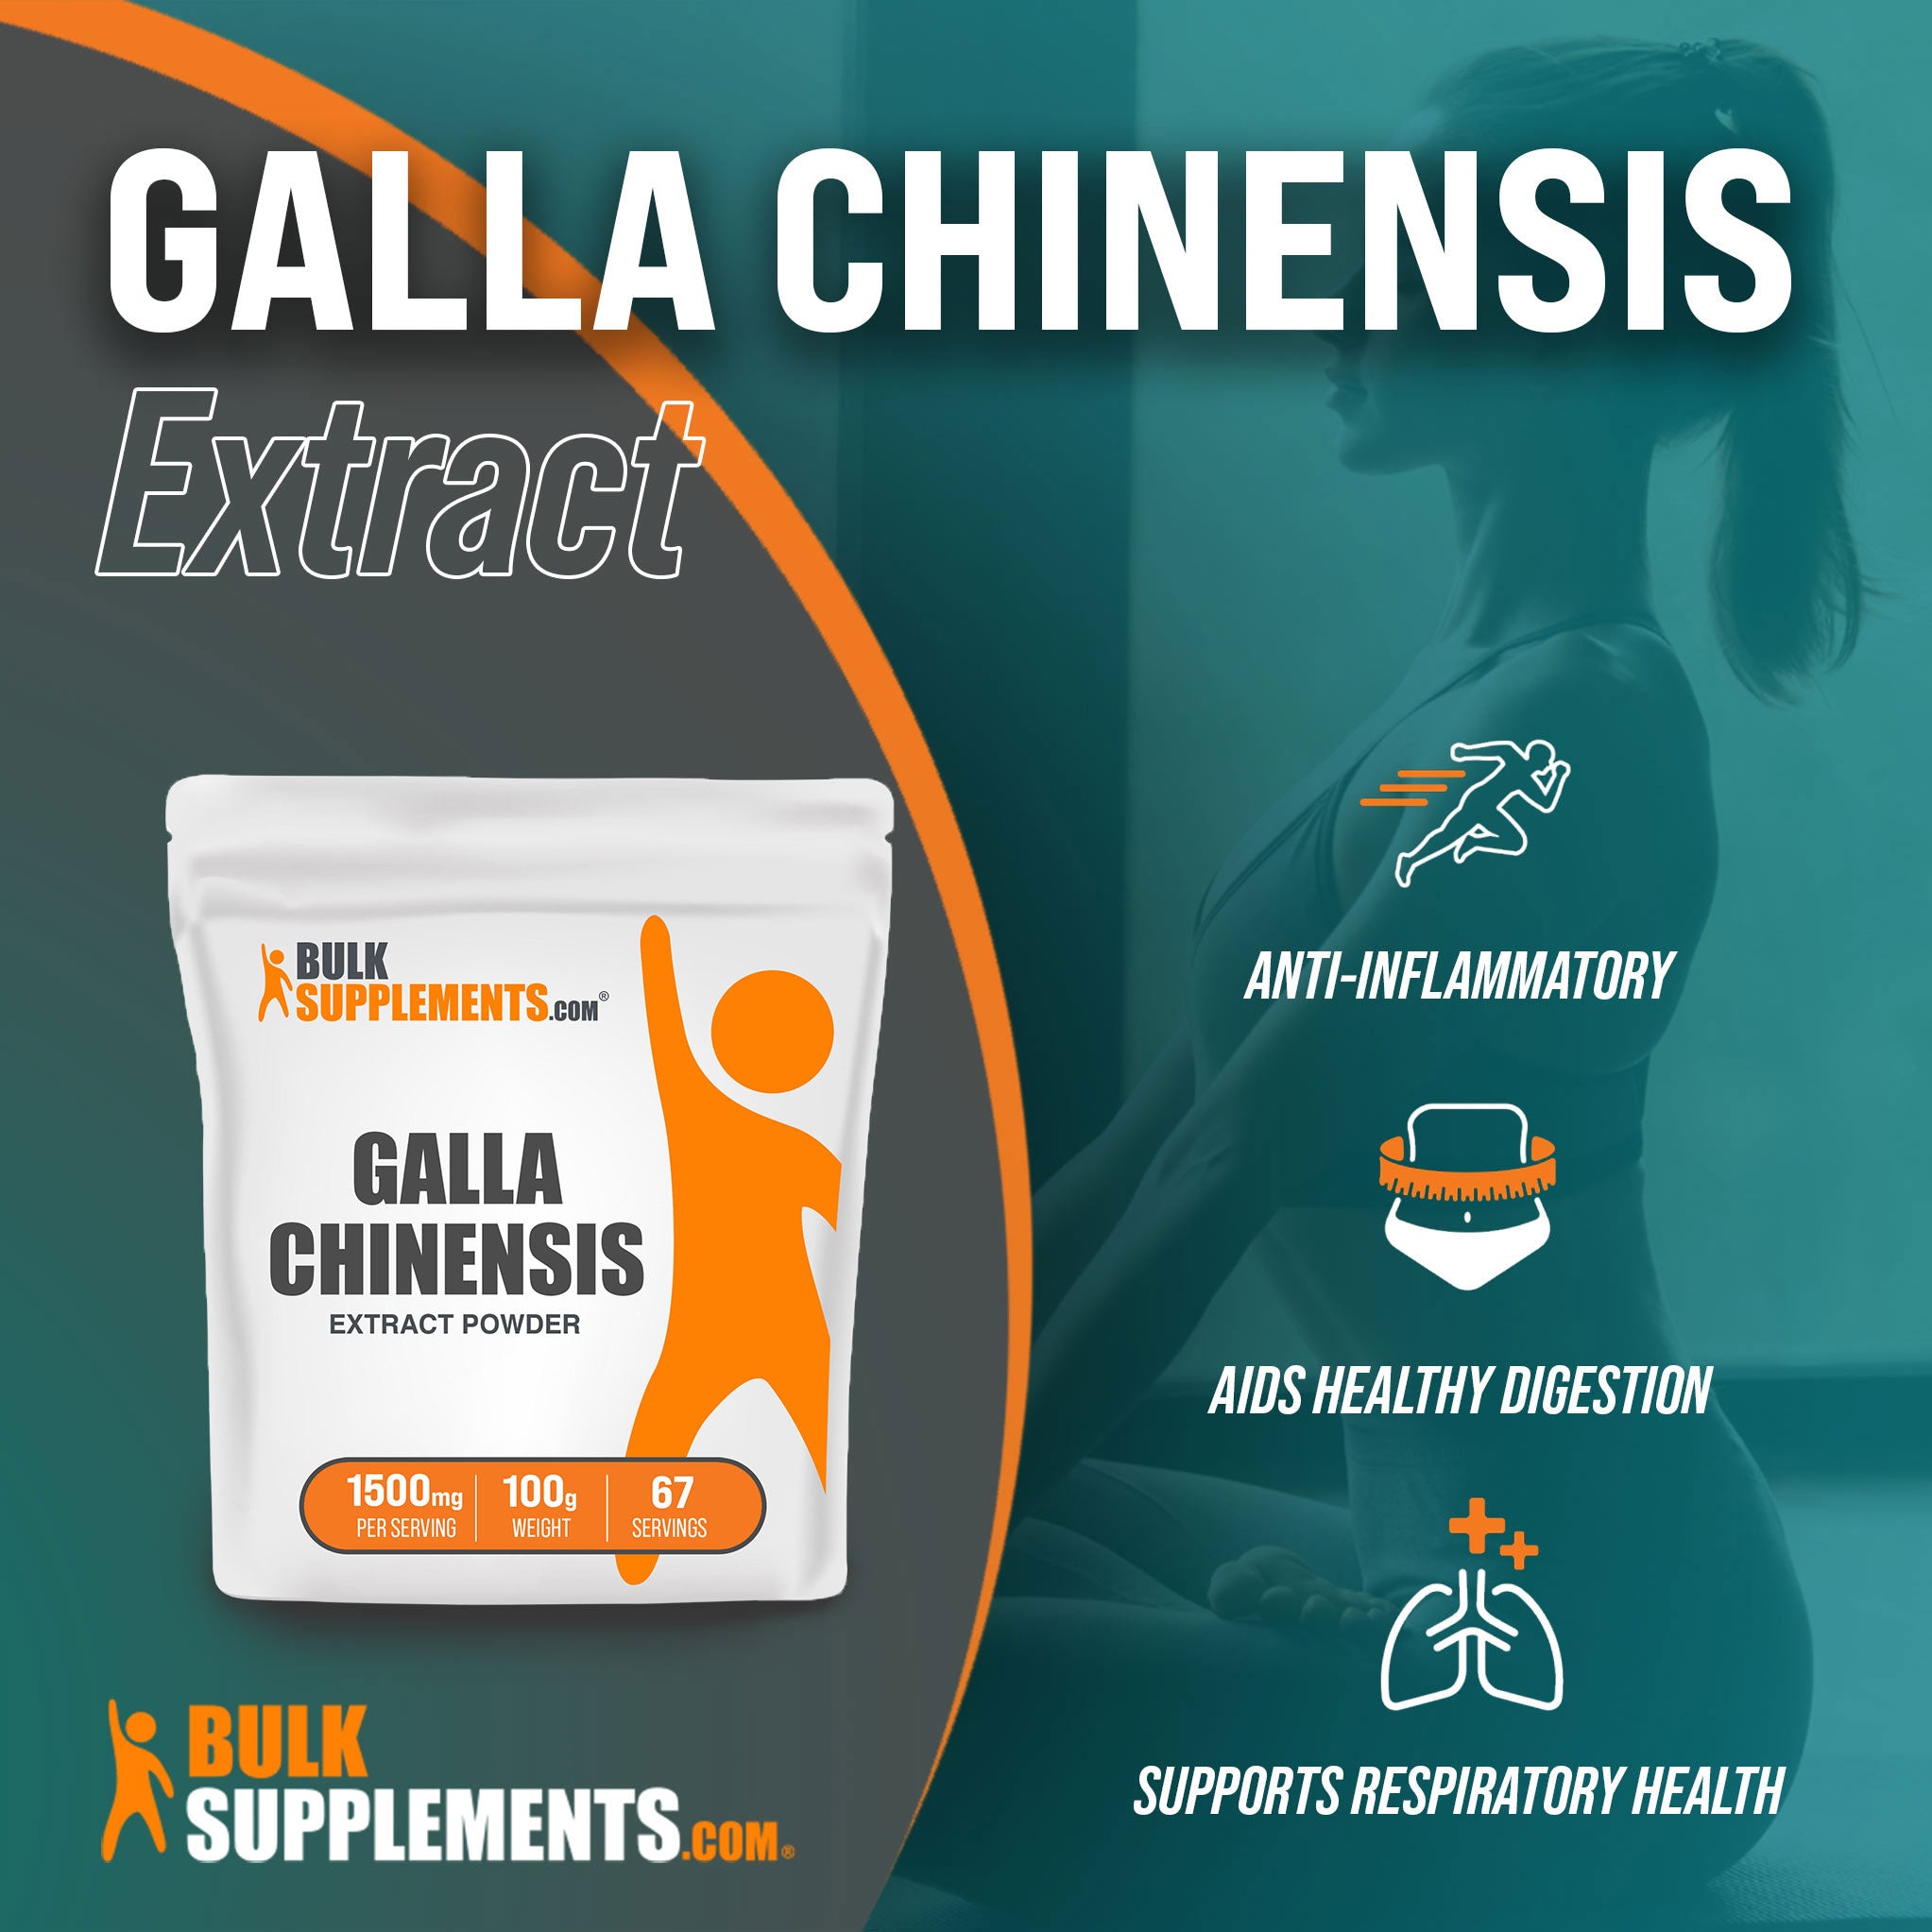 Benefits of Galla Chinensis Extract; anti-inflammatory, aids healthy digestion, supports respiratory health